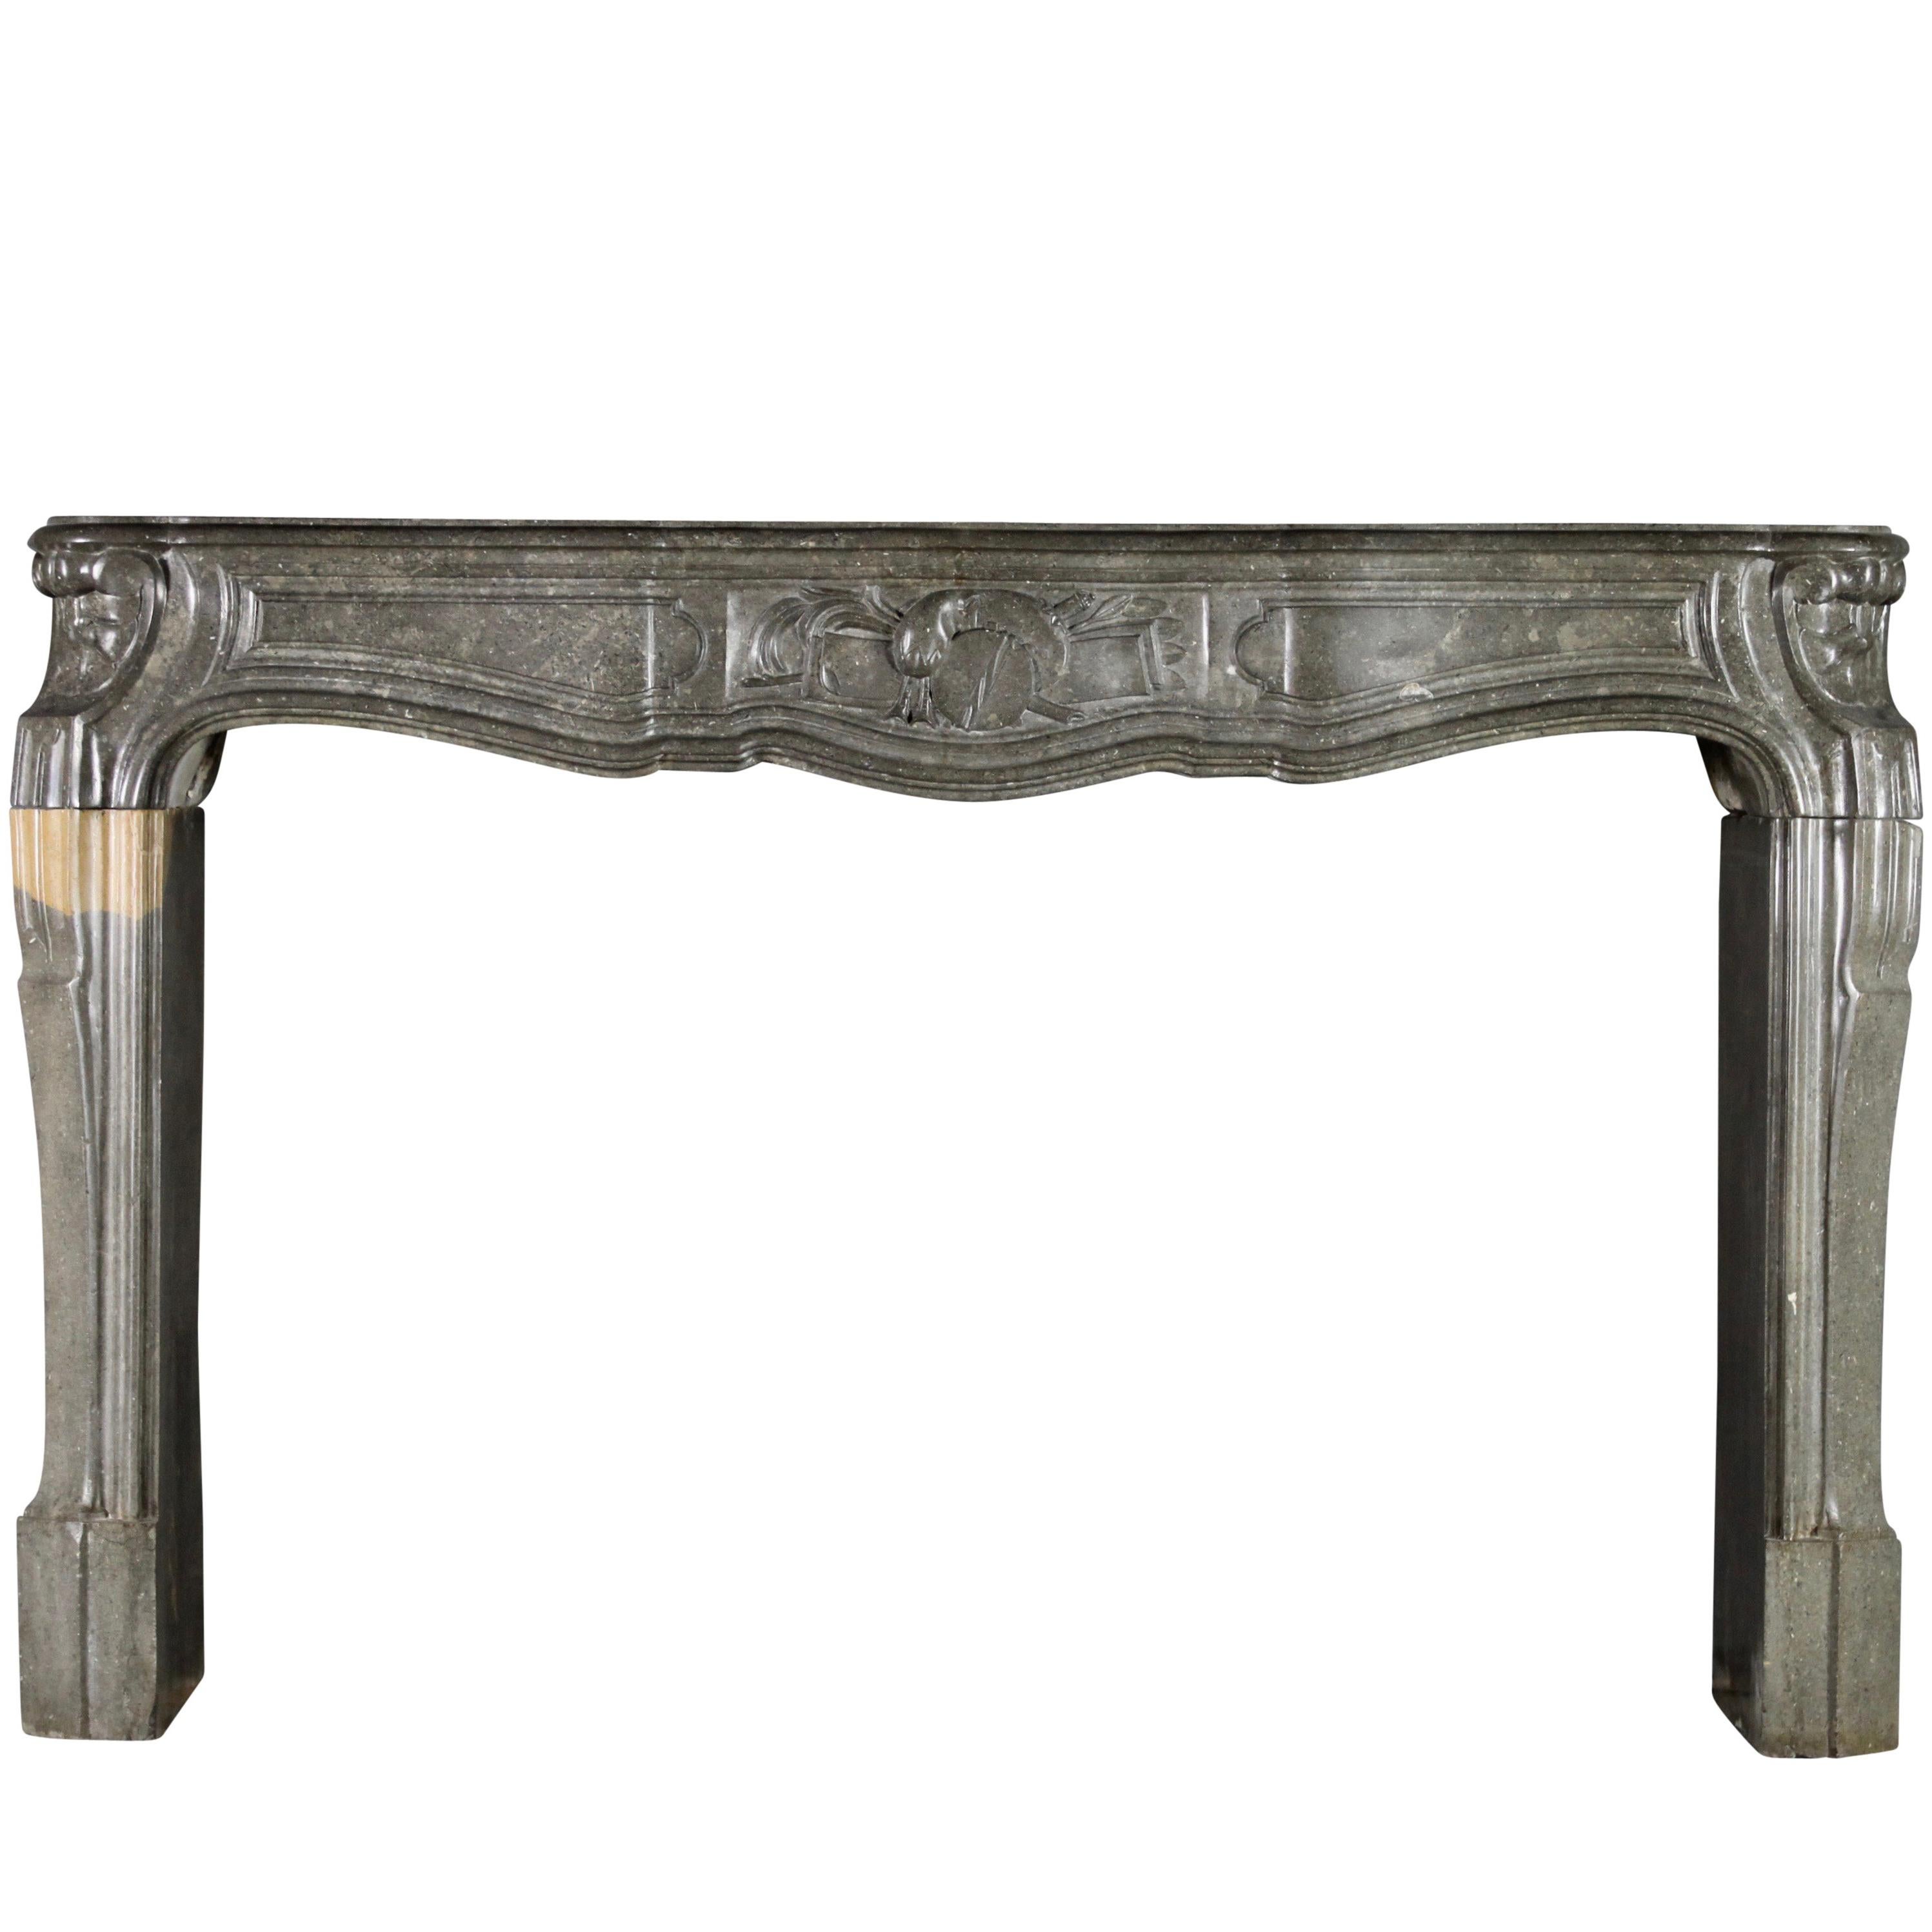 18th Century Fine French Antique Fireplace Surround